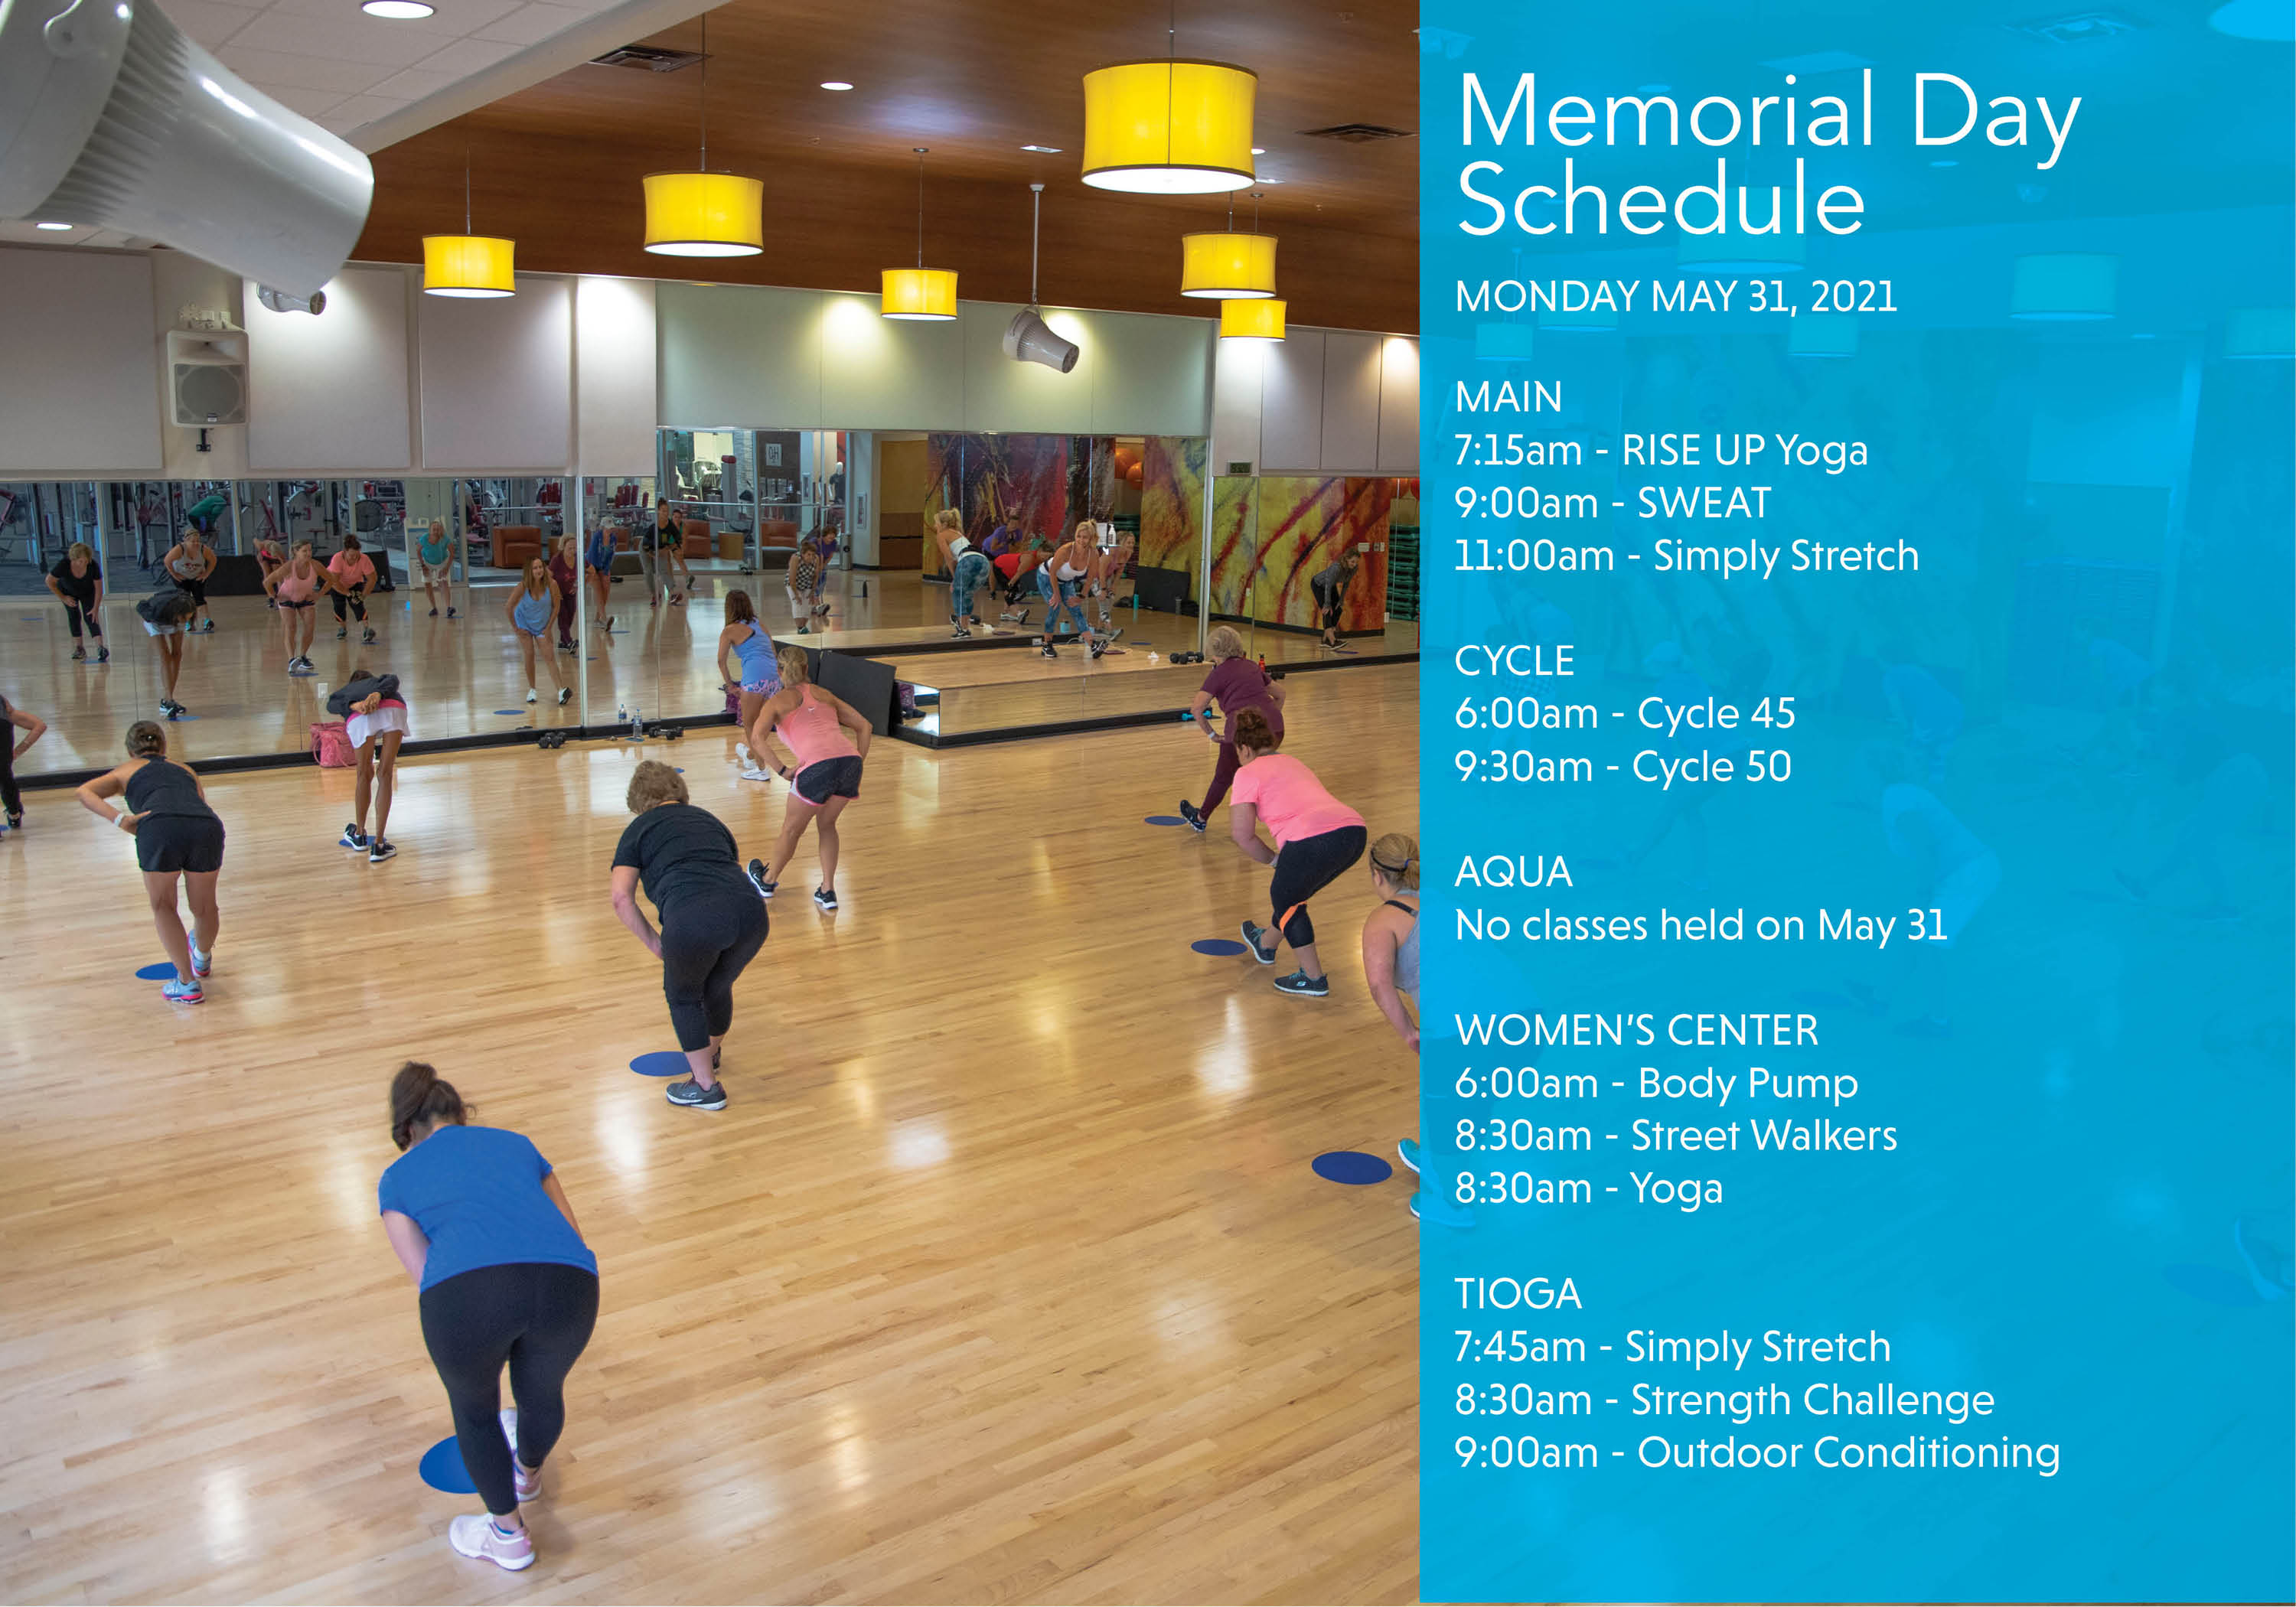 fitness connection memorial day hours